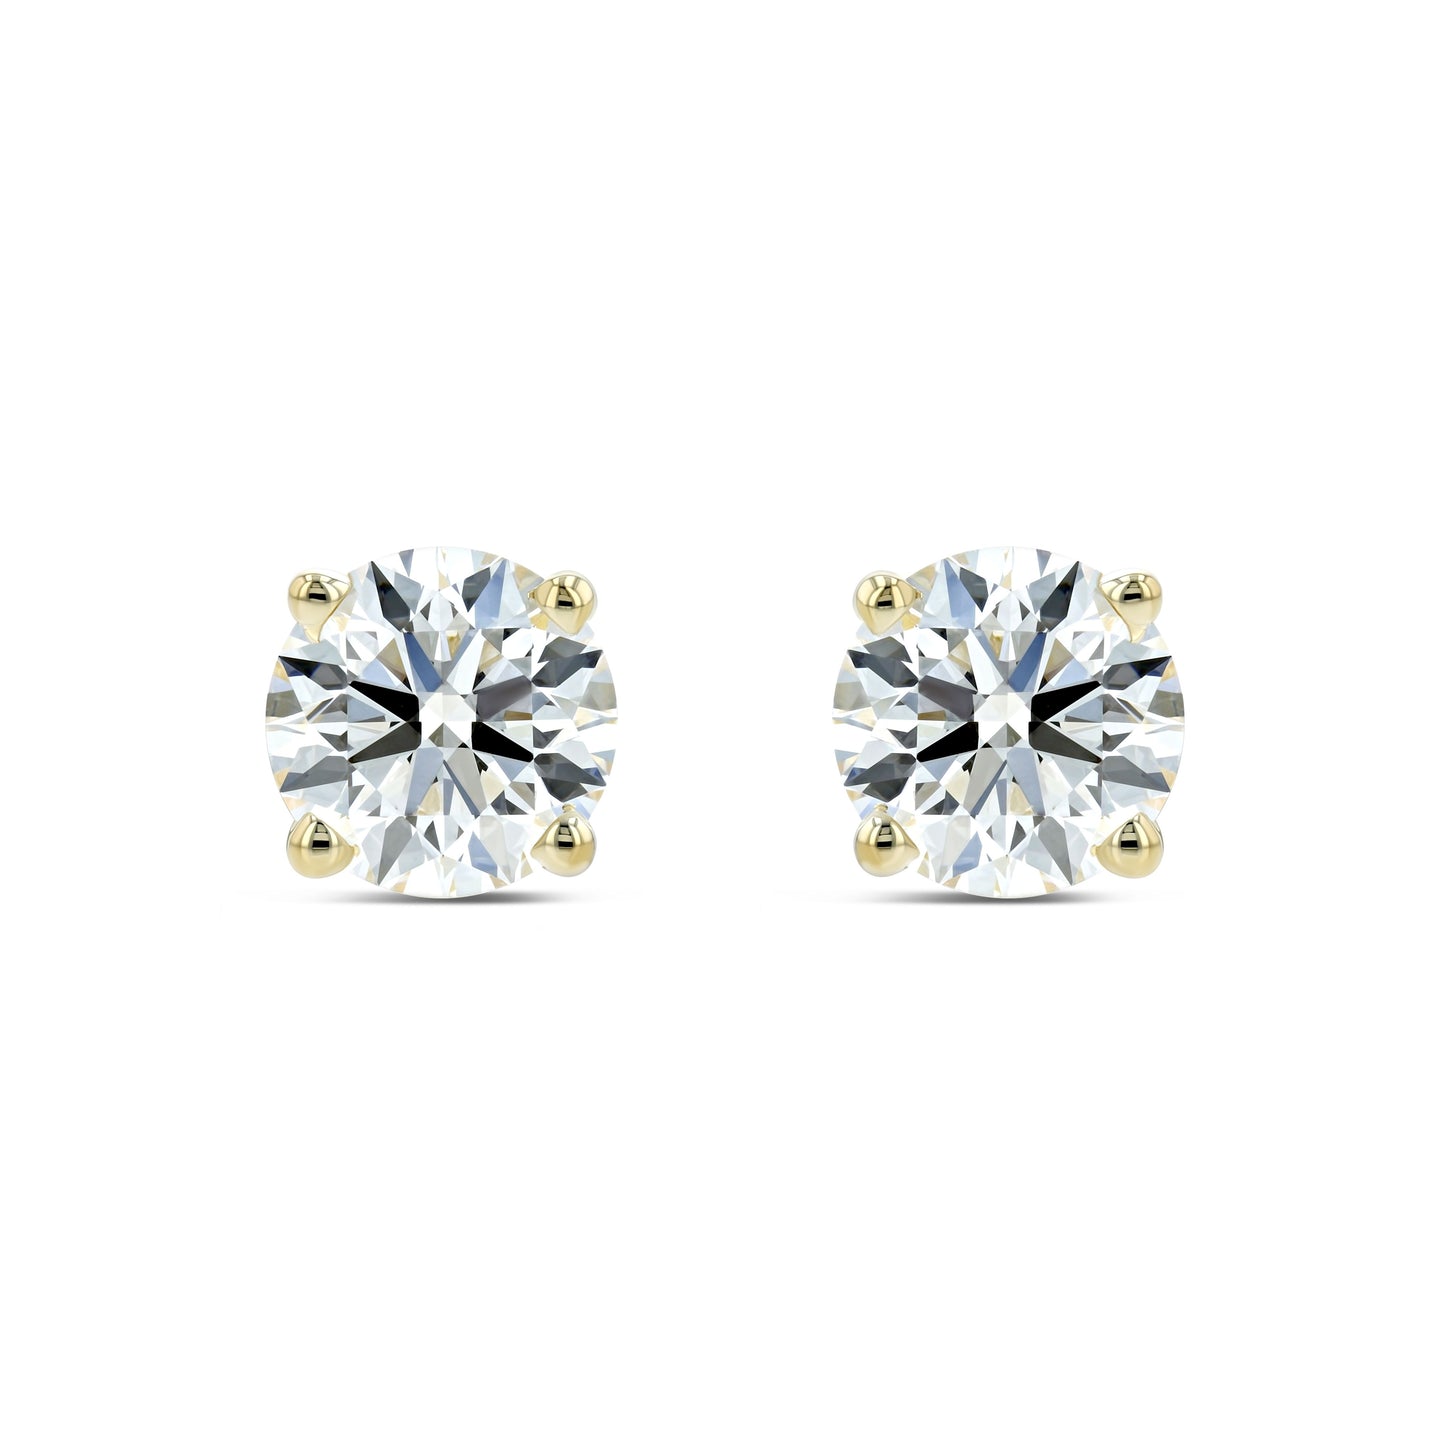 14k Yellow Gold 4-prong Round Diamond Stud Earrings 1ctw (5.00mm Ea), H Color, Si3-i1 Clarity